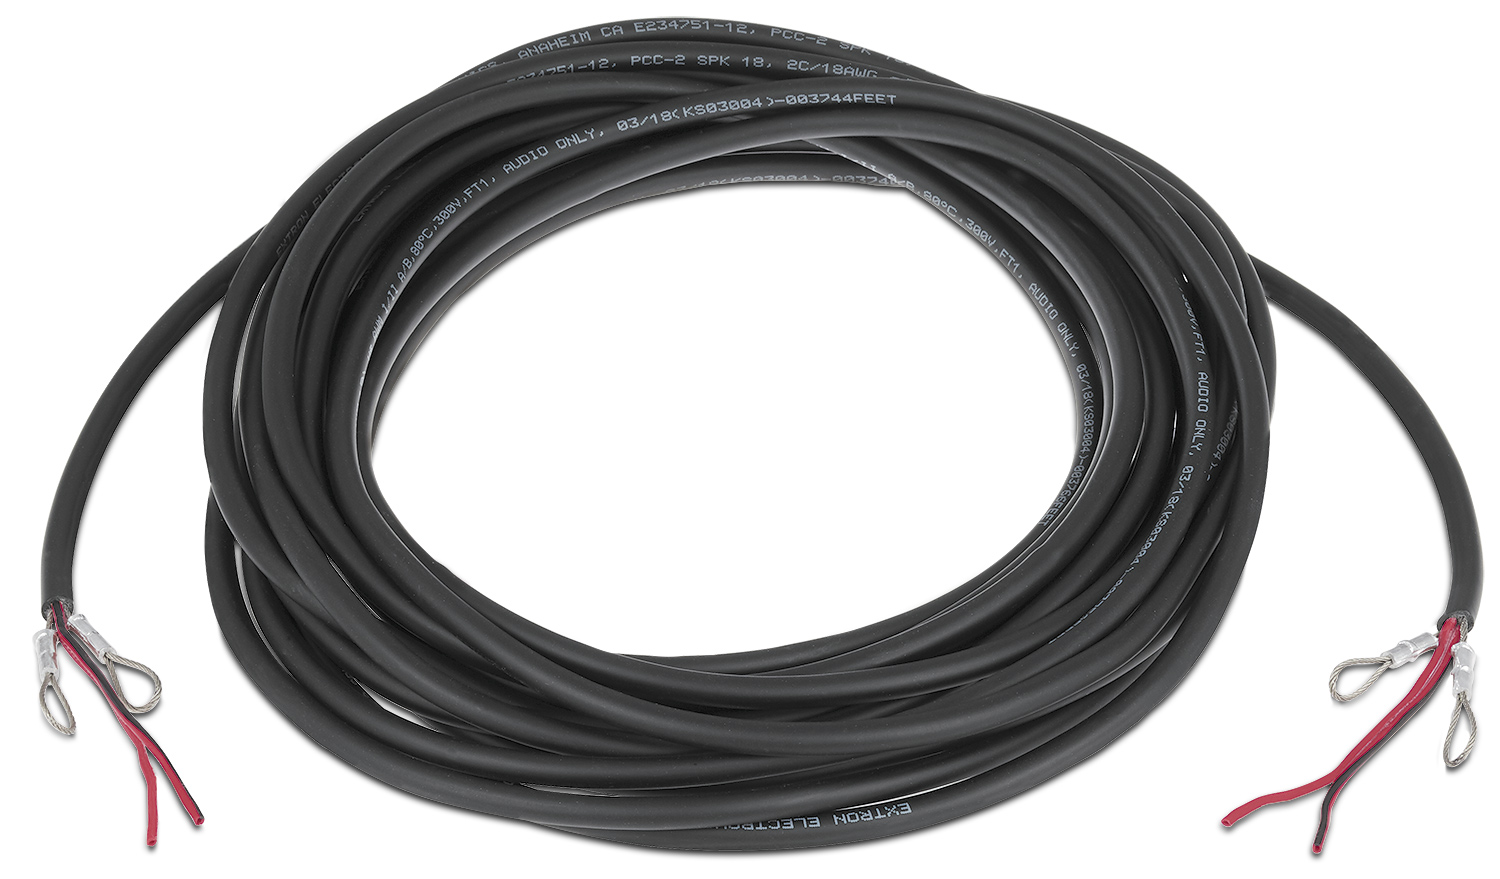 30’ of Pre-Terminated PendantConnect Speaker Cable for SF 26PT - Black